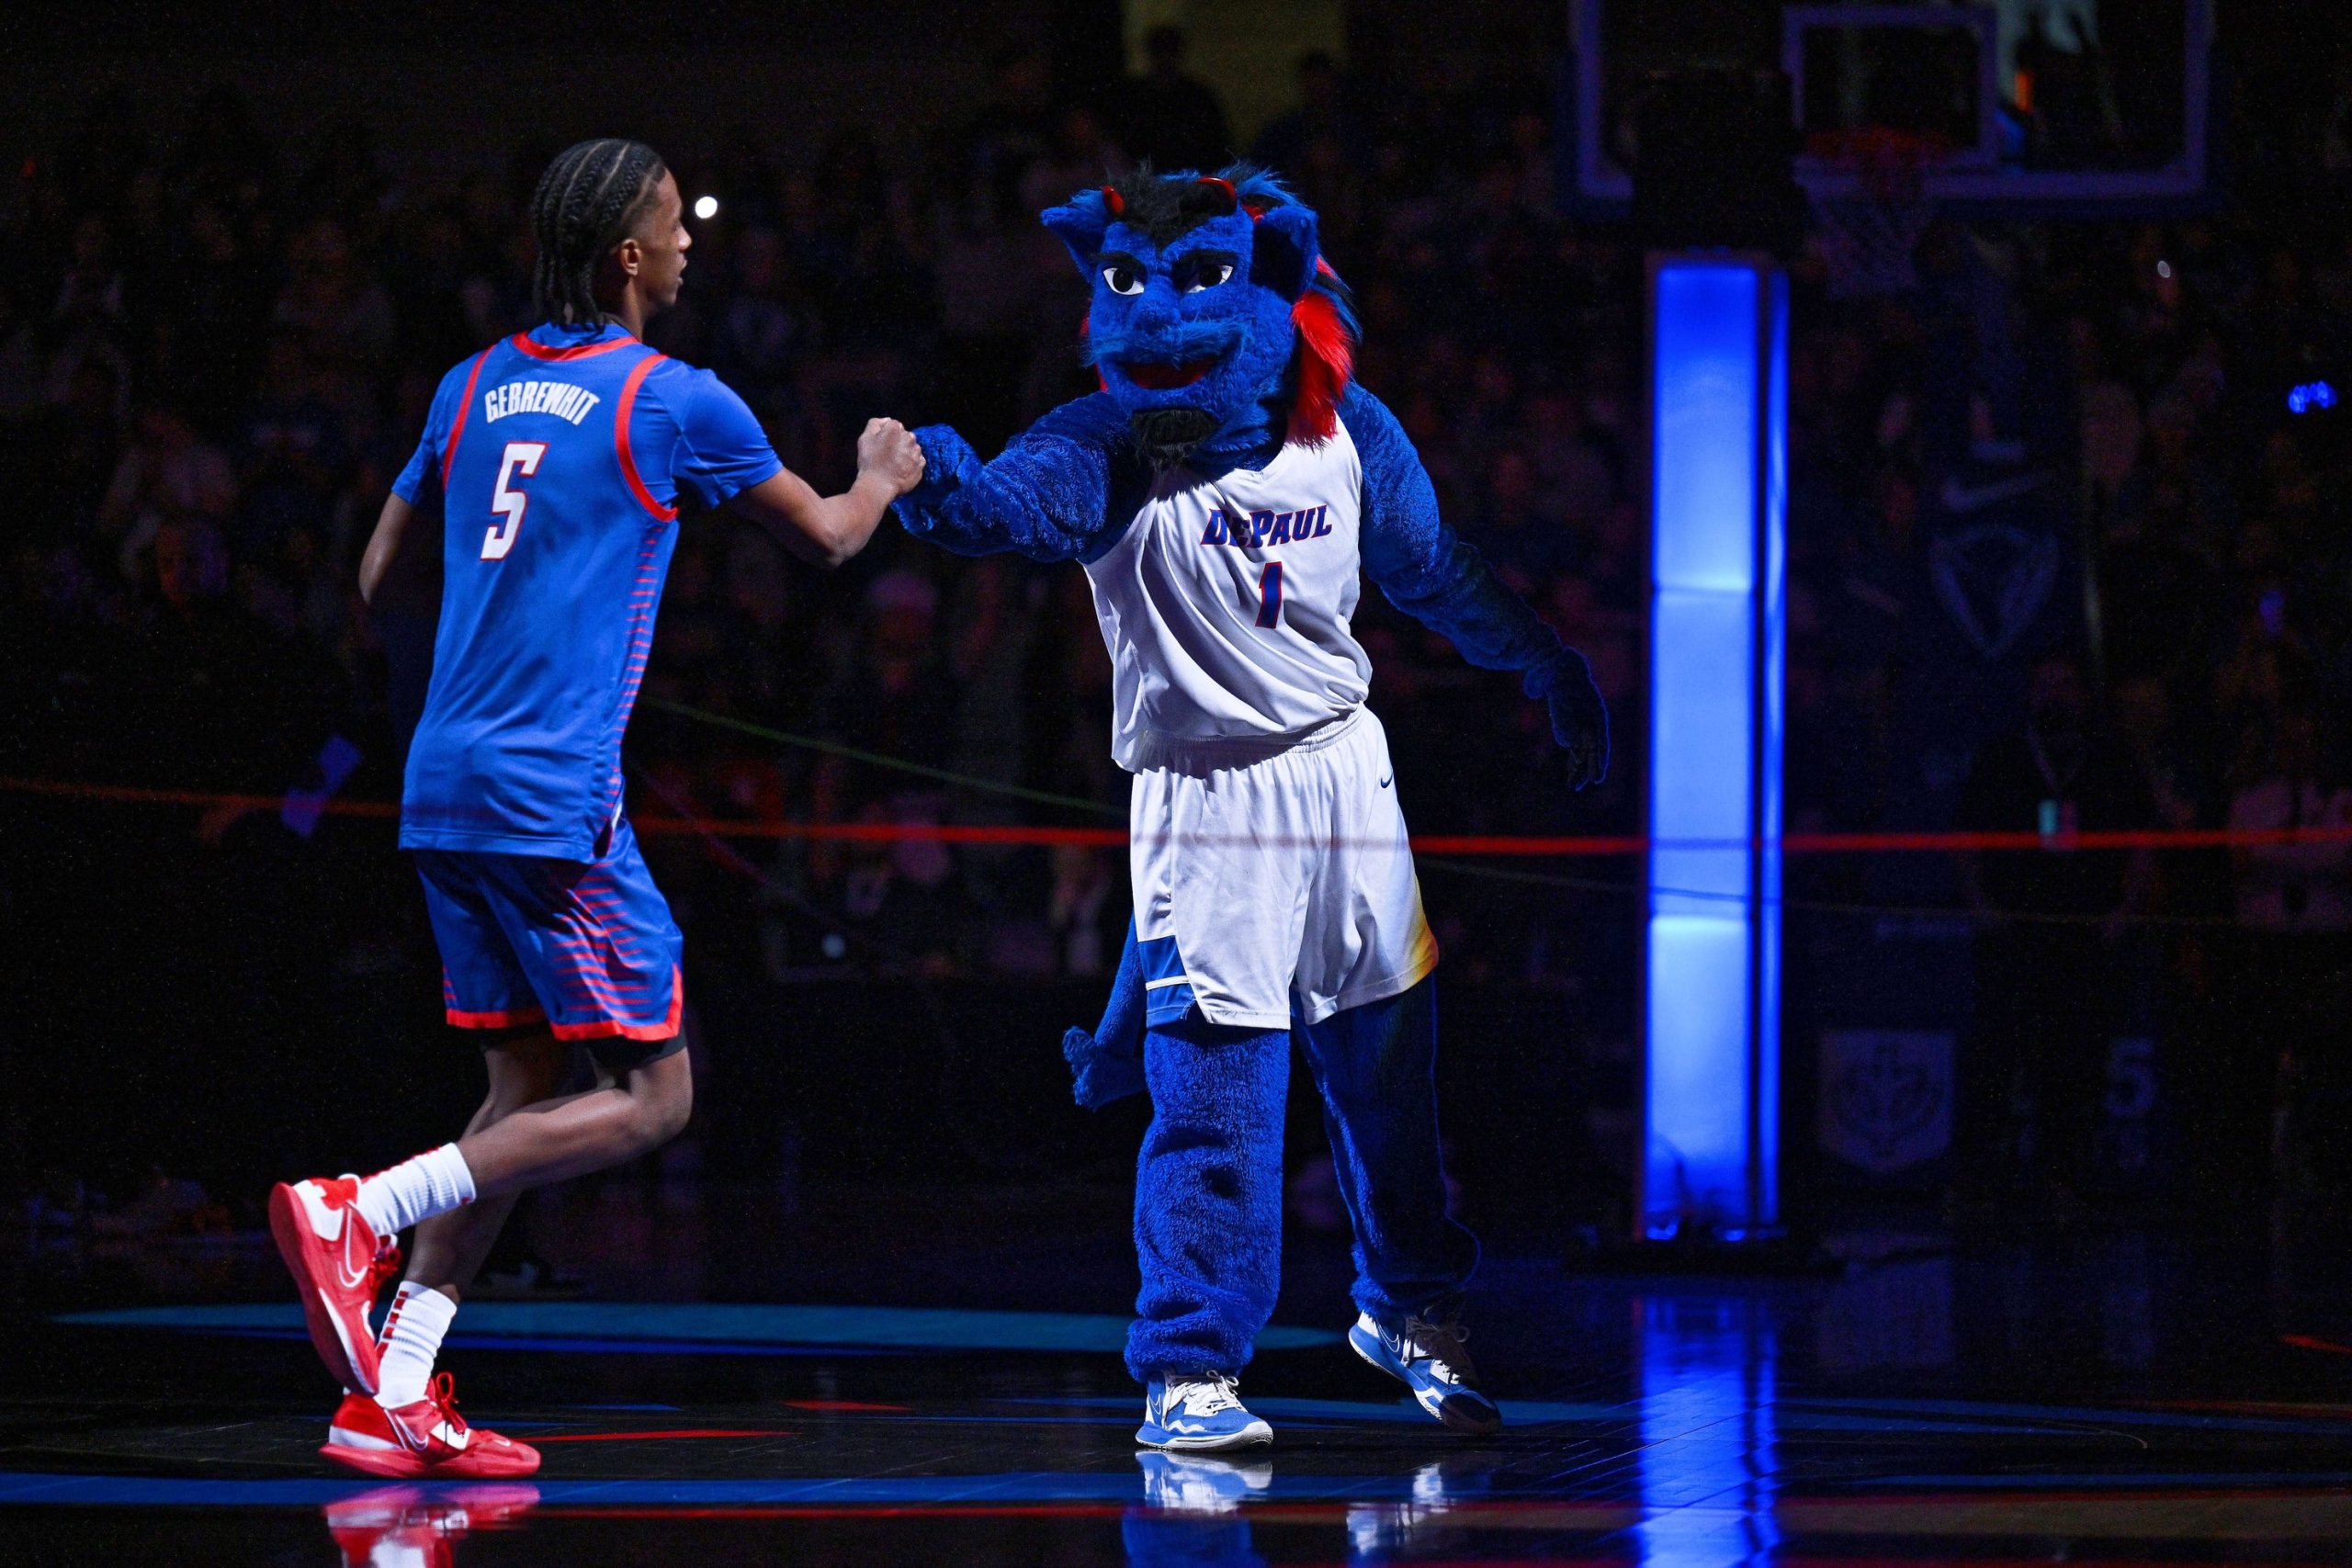 Jan 28, 2023; Chicago, Illinois, USA; The DePaul Blue Demon mascot fist bumps DePaul Blue Demons guard Philmon Gebrewhit (5) as he takes the court before a game against the Marquette Golden Eagles at Wintrust Arena. Mandatory Credit: Jamie Sabau-USA TODAY Sports